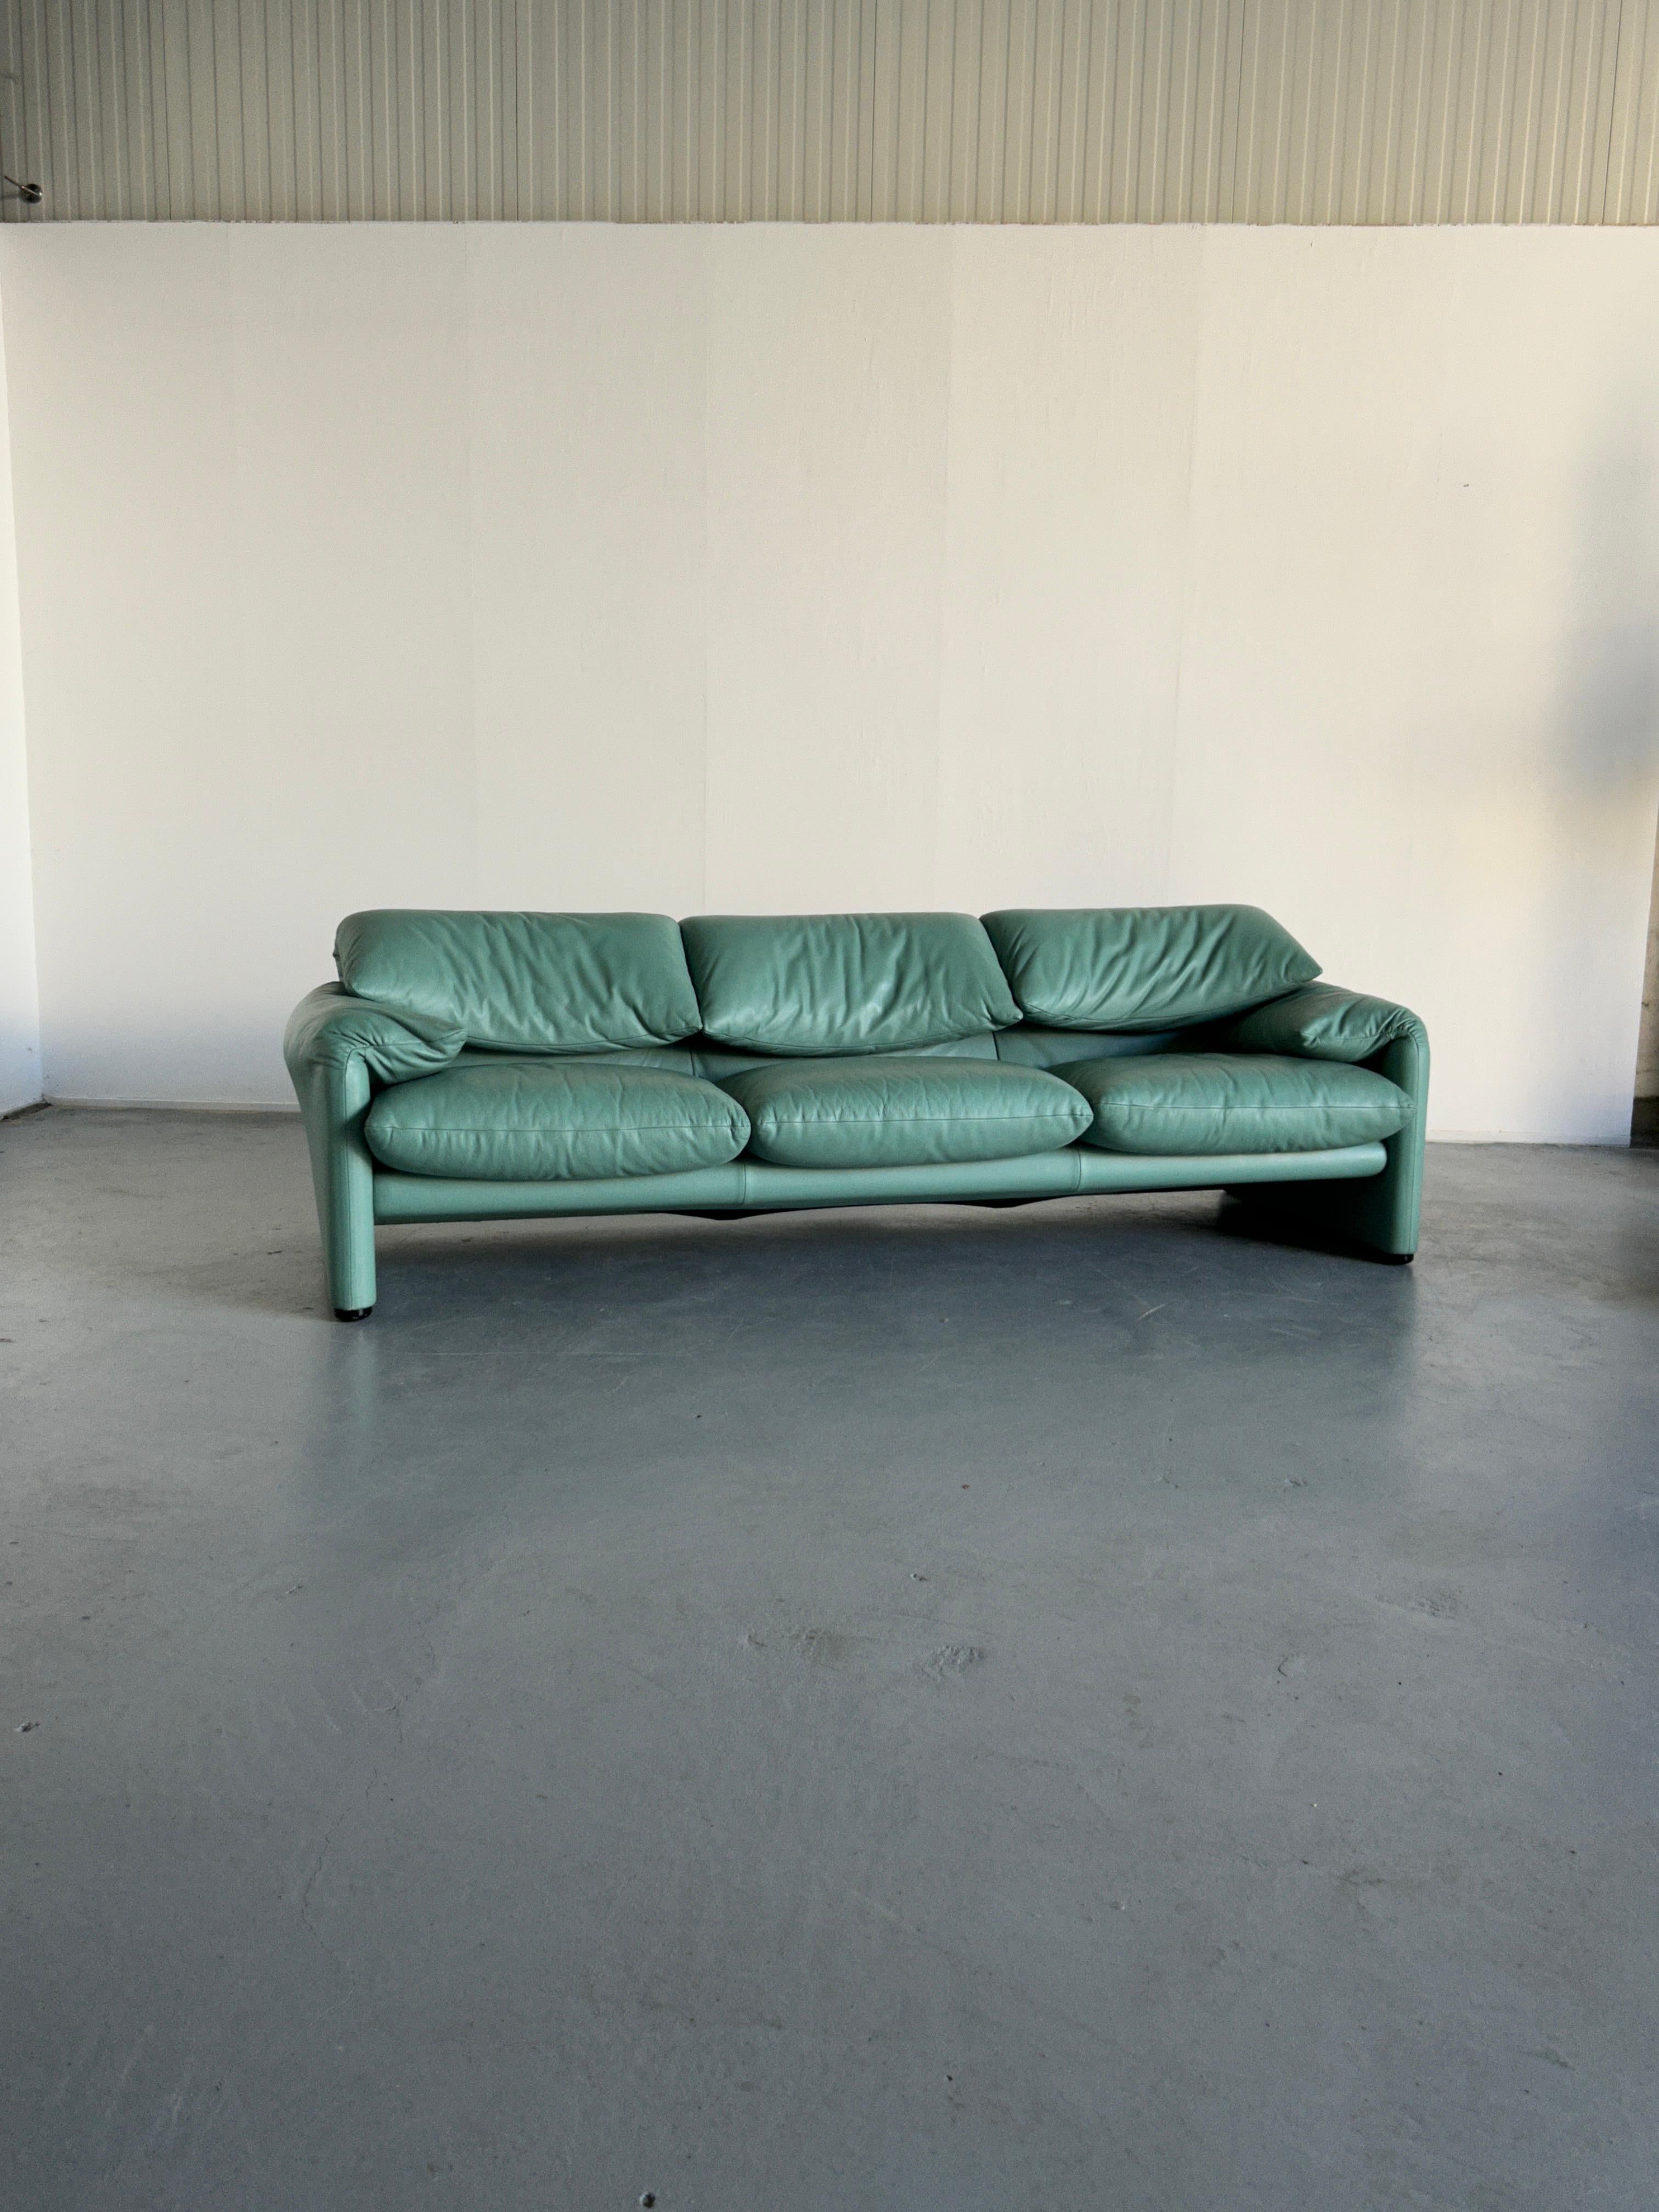 An exceptionally rare mint green leather edition of the 1970s designed original iconic 'Maralunga' three-seater sofa, designed by Vico Magistretti for Cassina. One of the most rare editions ever produced.

Late 1990s or early 2000s production.

In